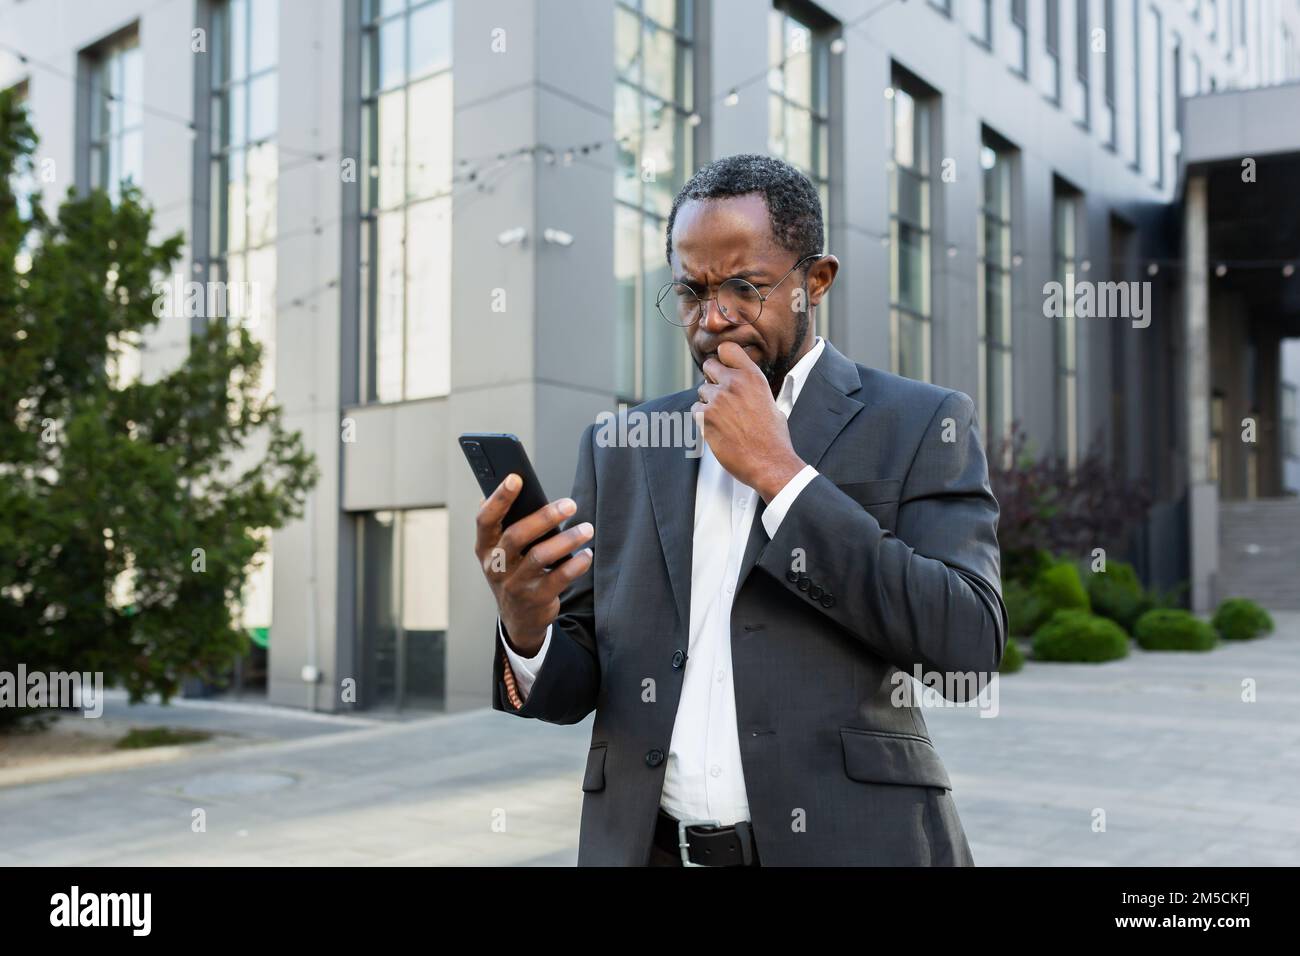 Mature senior african american boss reading bad news on phone, businessman in business suit outside office building using smartphone upset and disappointed by notification. Stock Photo